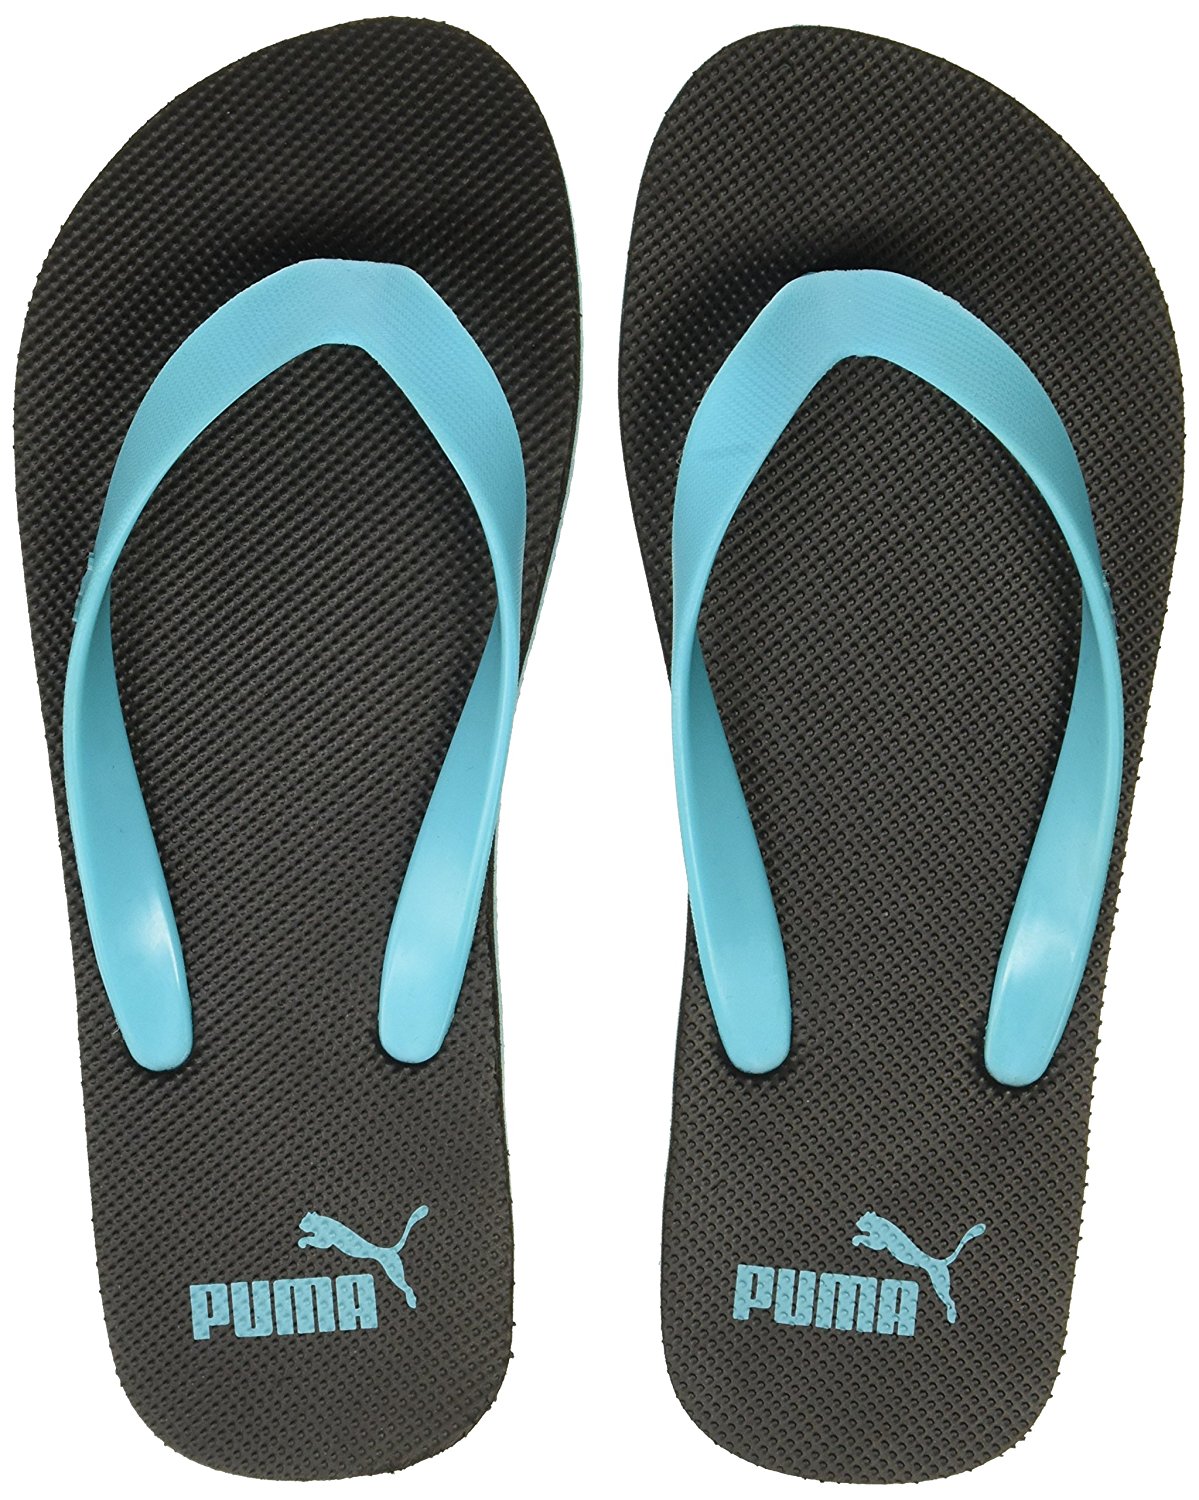 Amazon - Buy Puma Slippers at Minimum 60% off Starting from Rs. 174